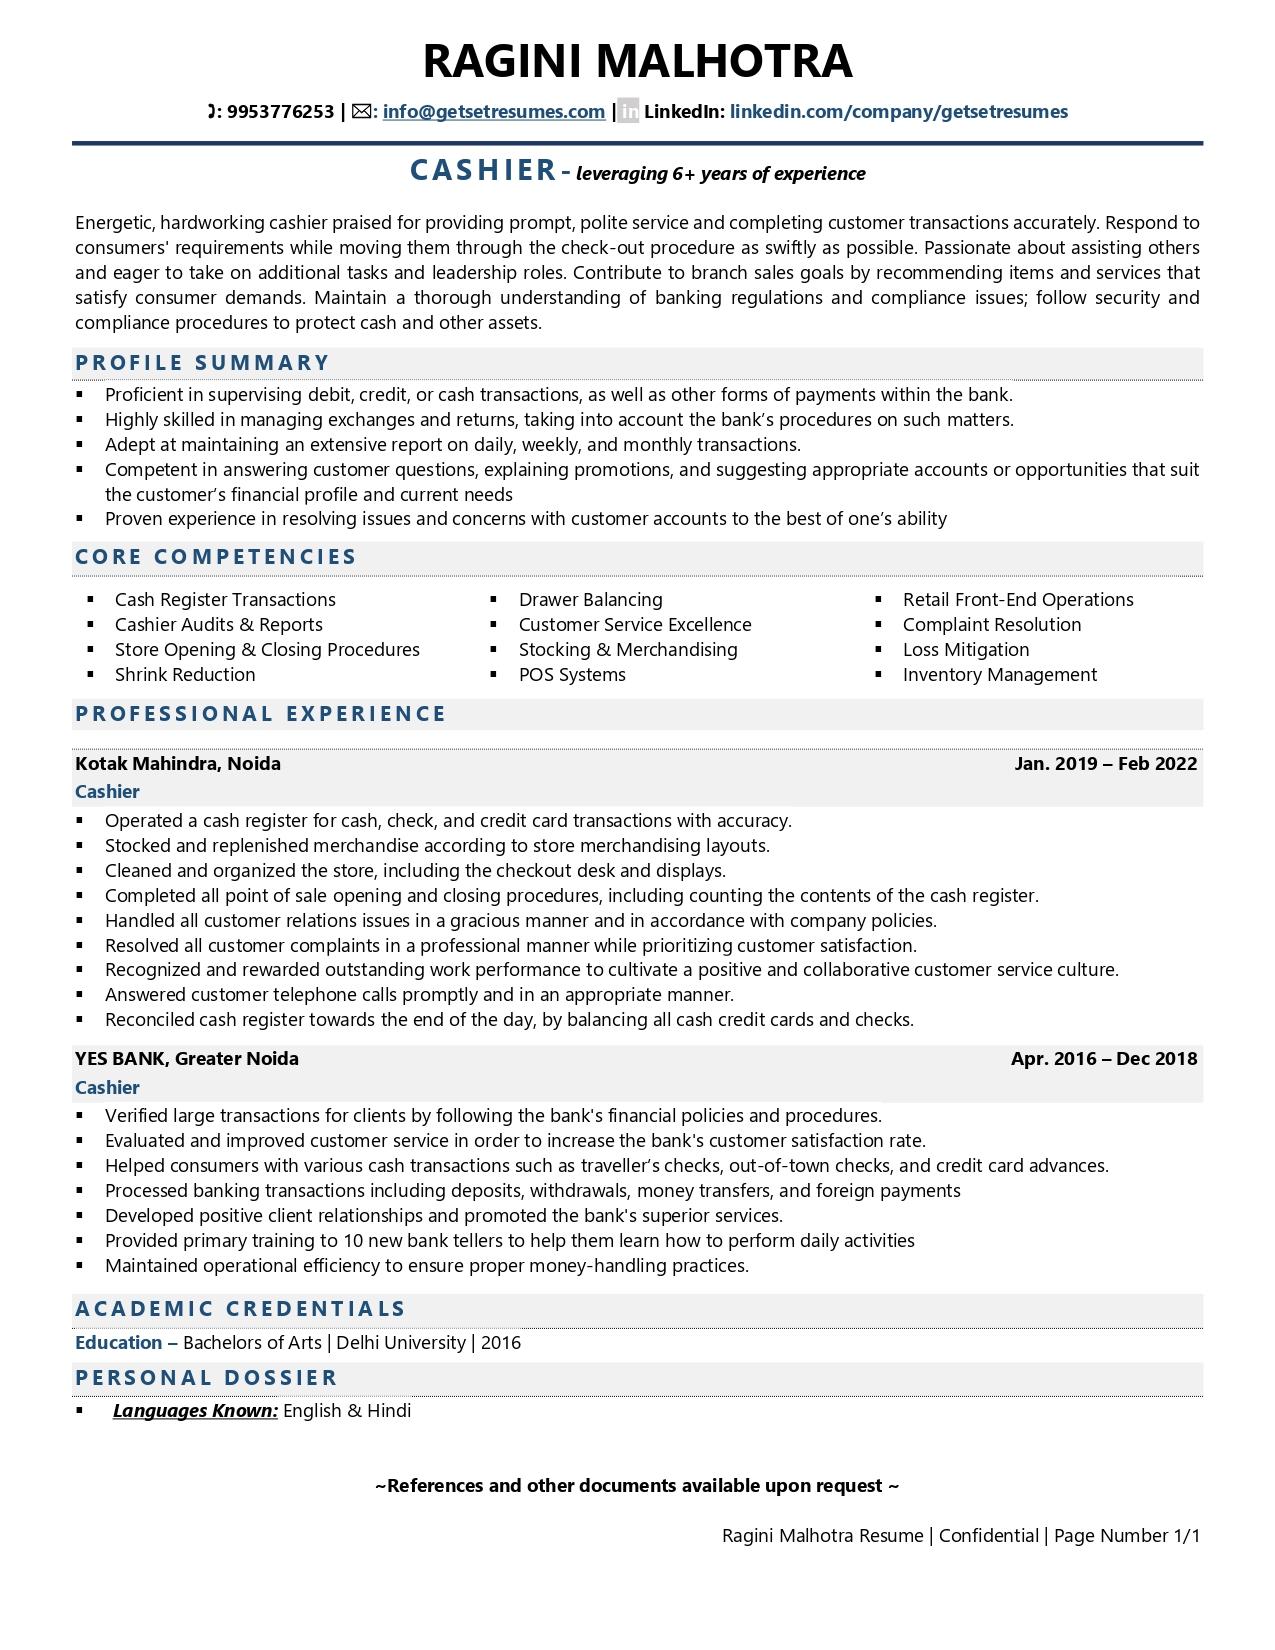 Cashier - Resume Example & Template